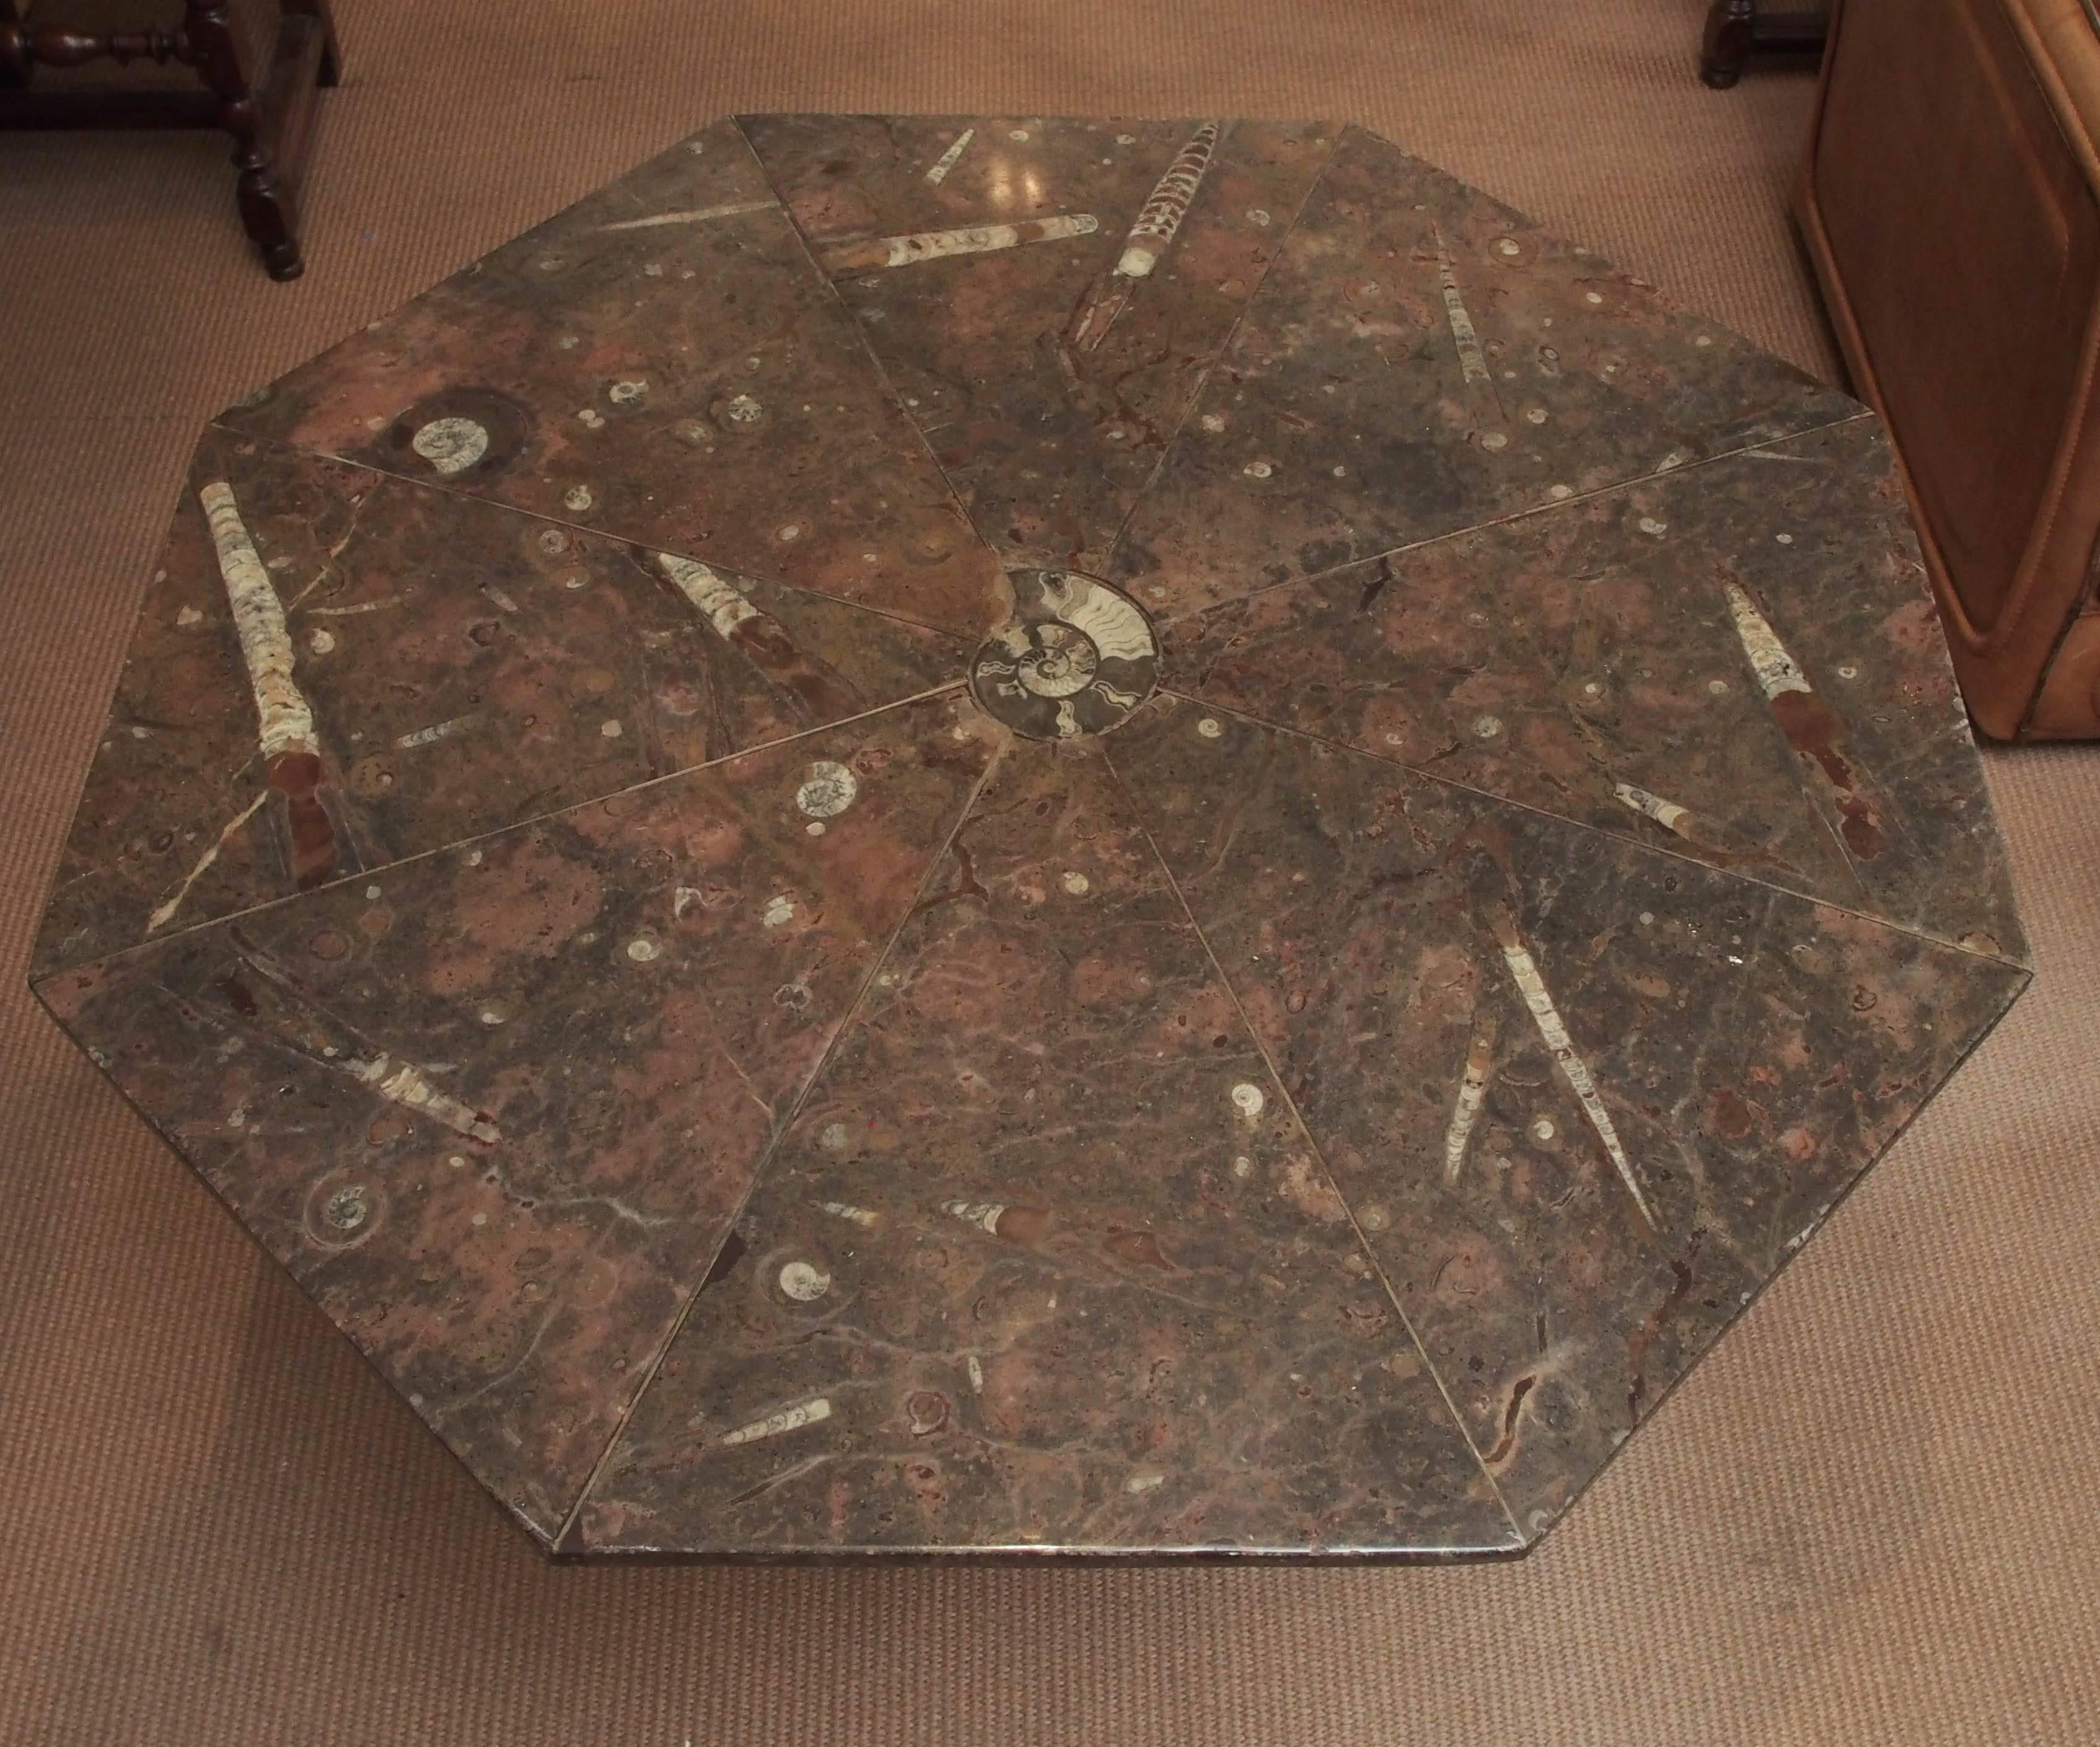 Eight pieces of fossilized marble are beautifully joined at the center by an Ammonite Shell. The octagonal table has a metal base, and measures 40 inches in diameter by 28 3/4 inches high, 1960s, French.